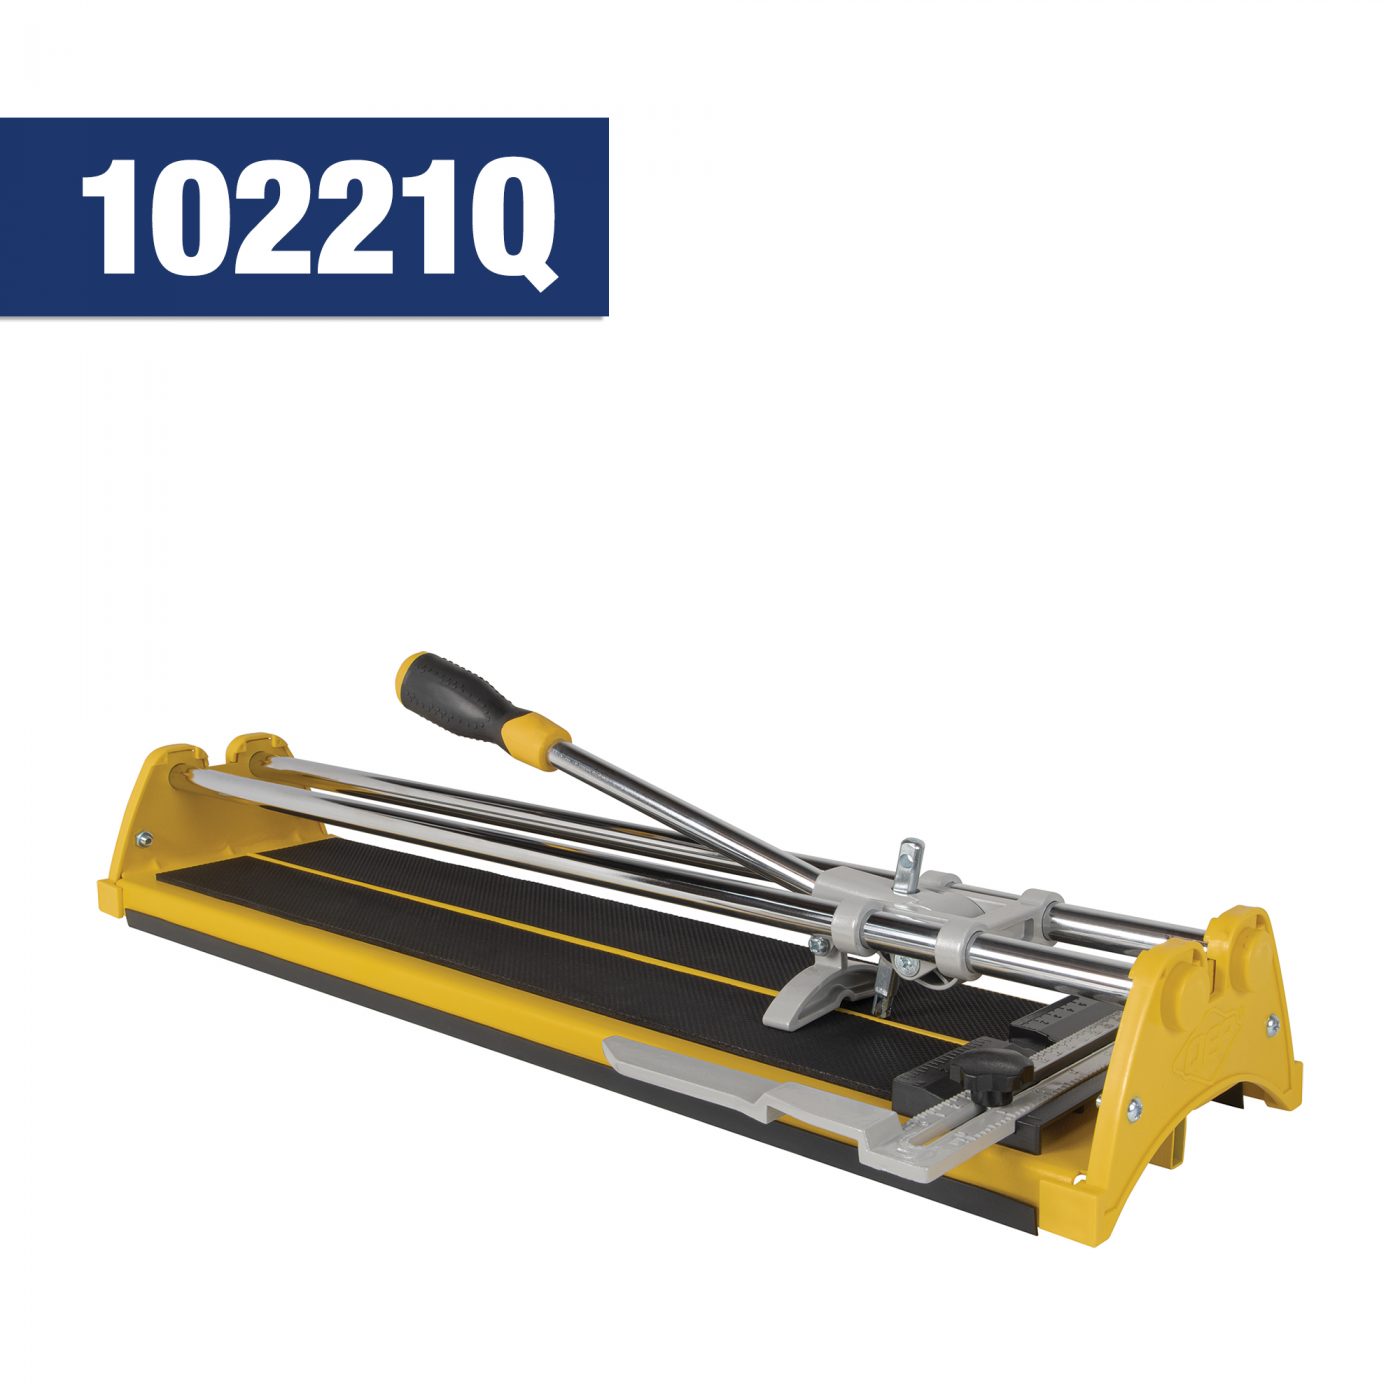 21" Professional Tile Cutter